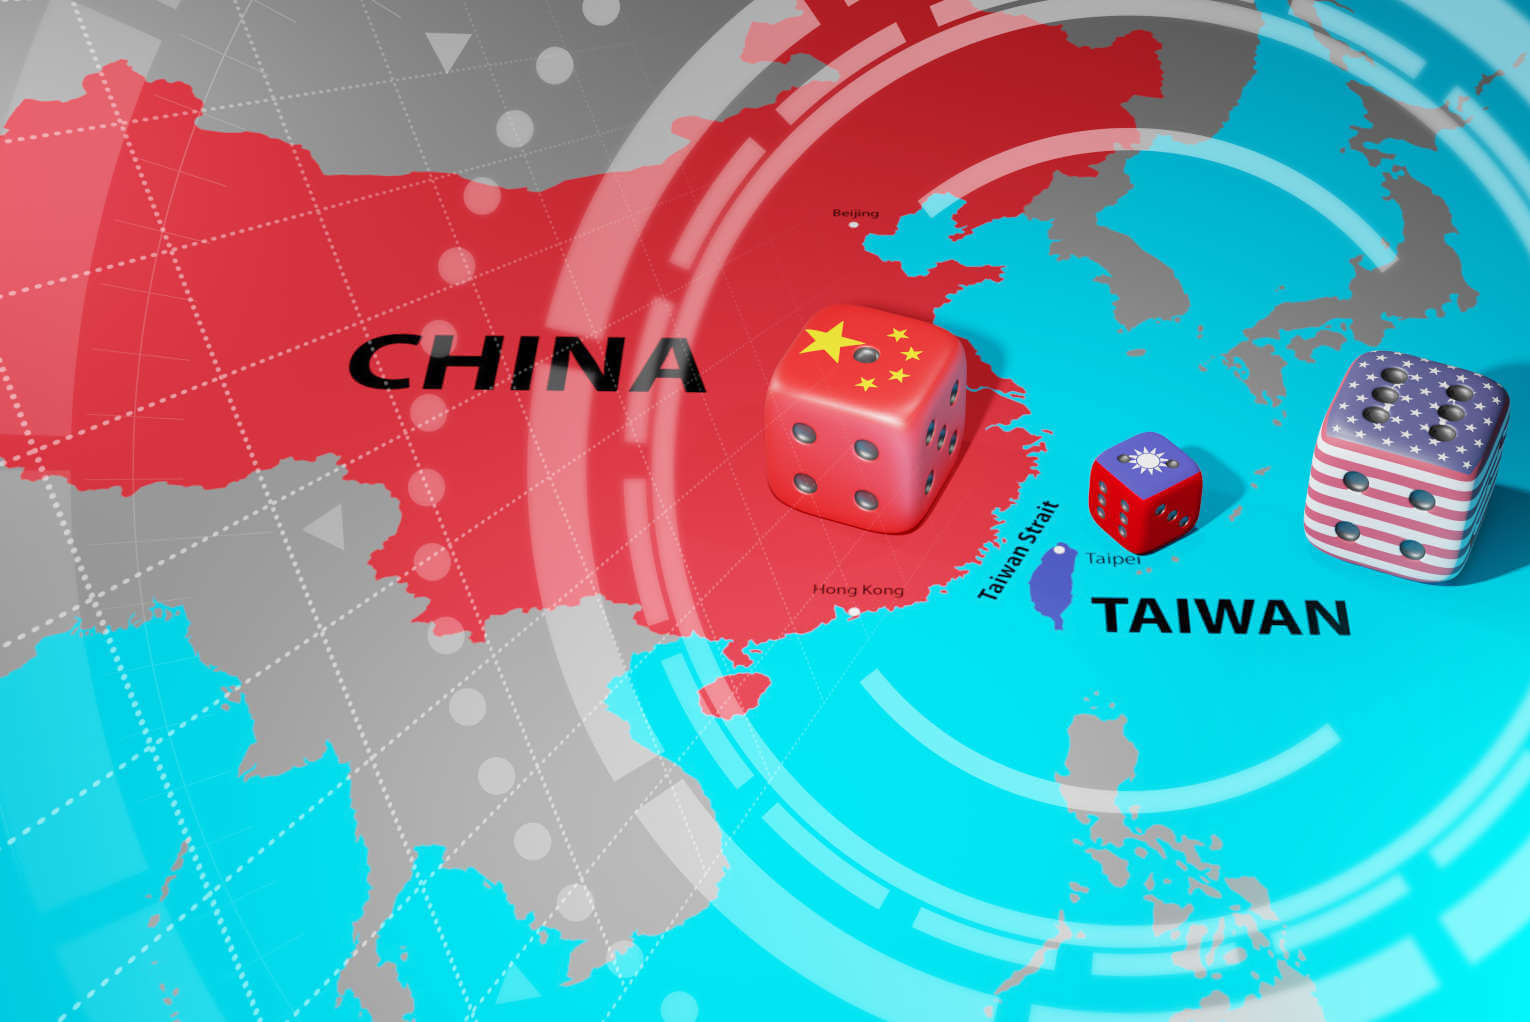 China’s War Drills Against Taiwan Signal Apocalyptic Intent, Western World Shrugs